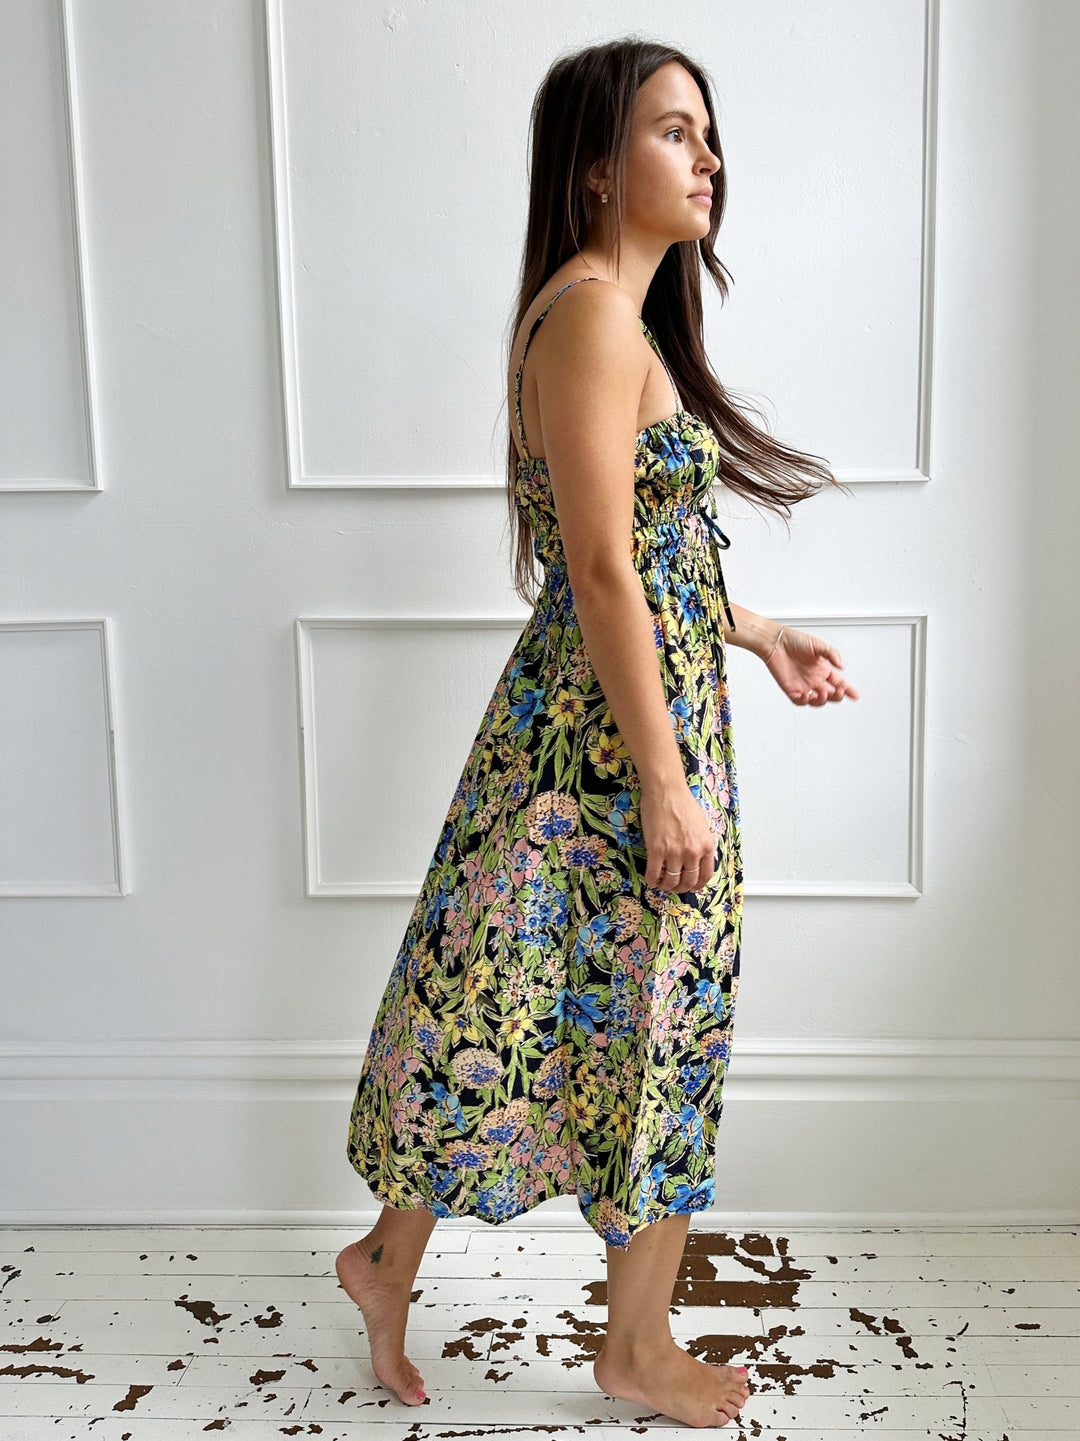 Floral Midi Dress w/ Cinched Bodice - Spring Sweet